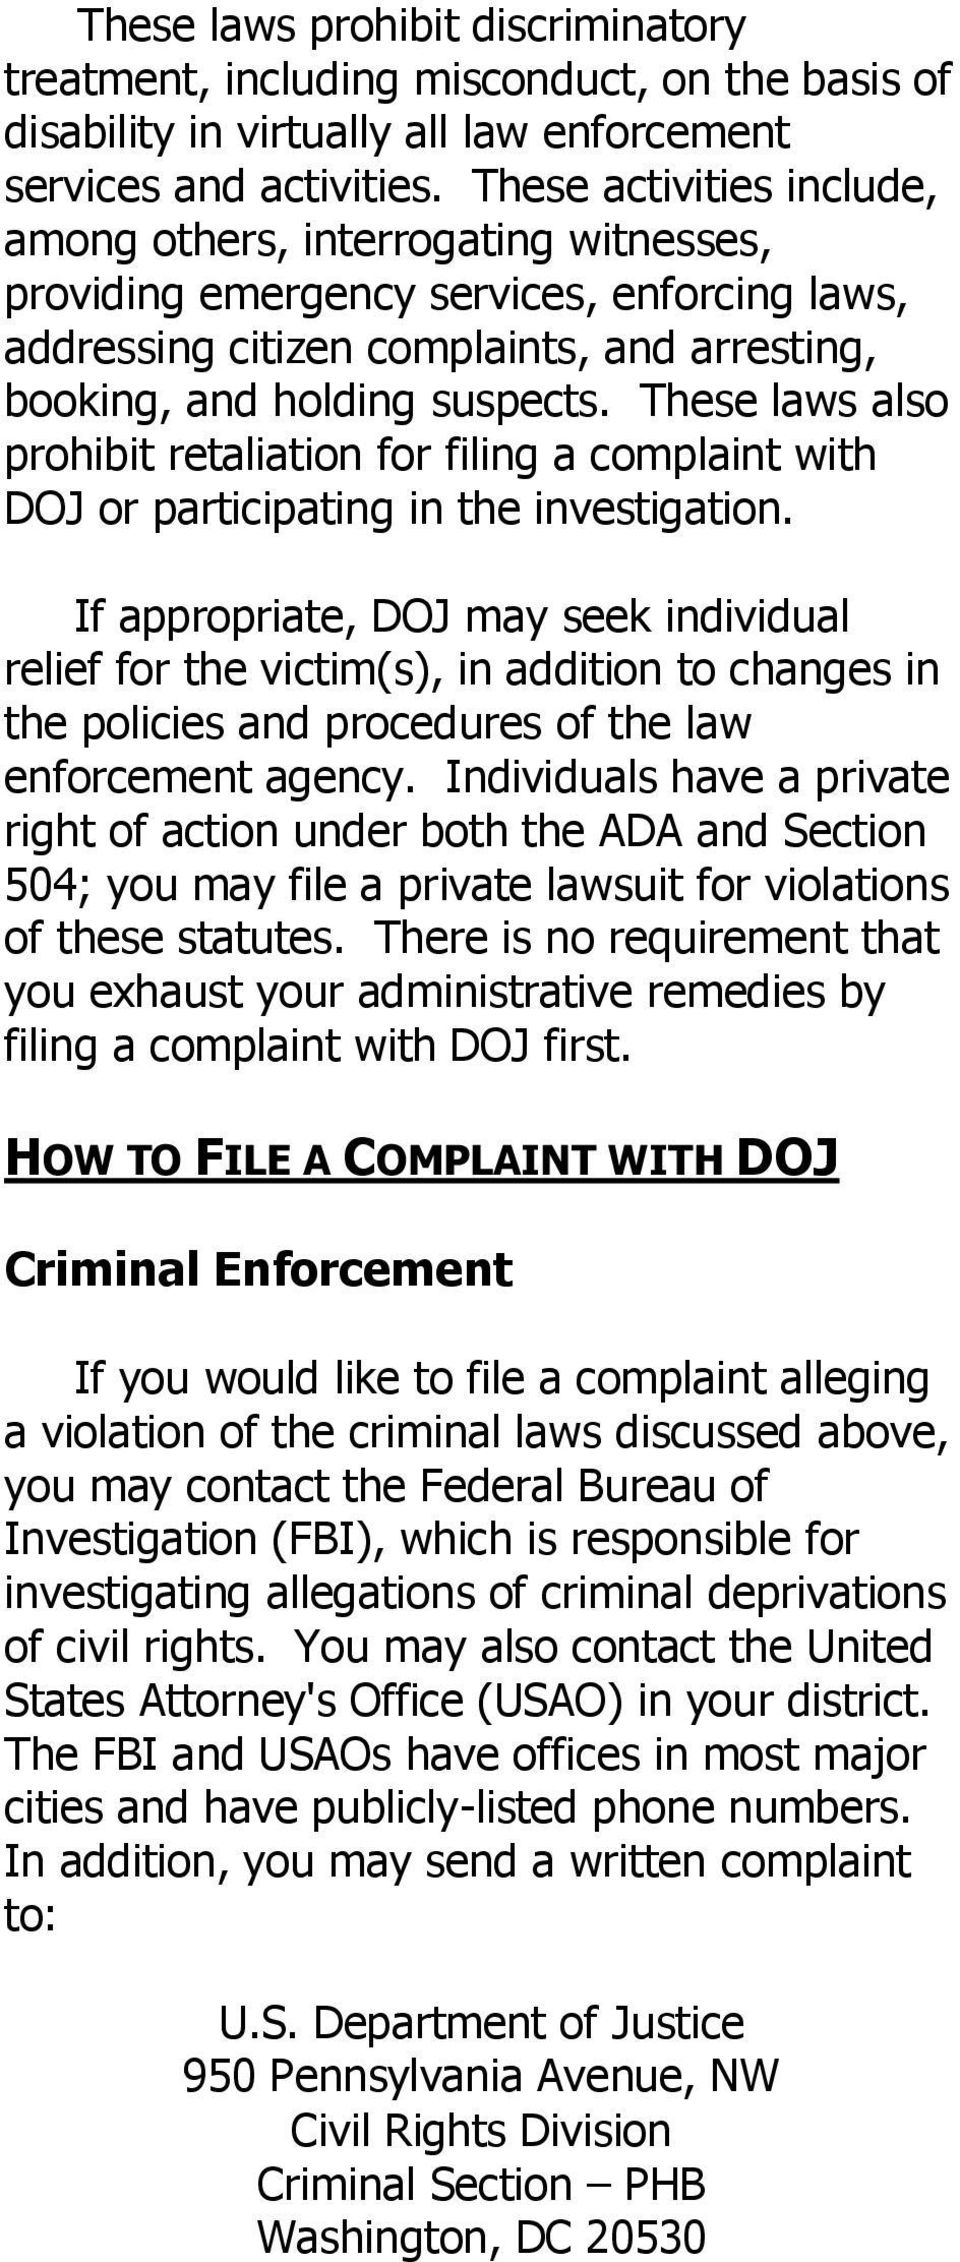 These laws also prohibit retaliation for filing a complaint with DOJ or participating in the investigation.